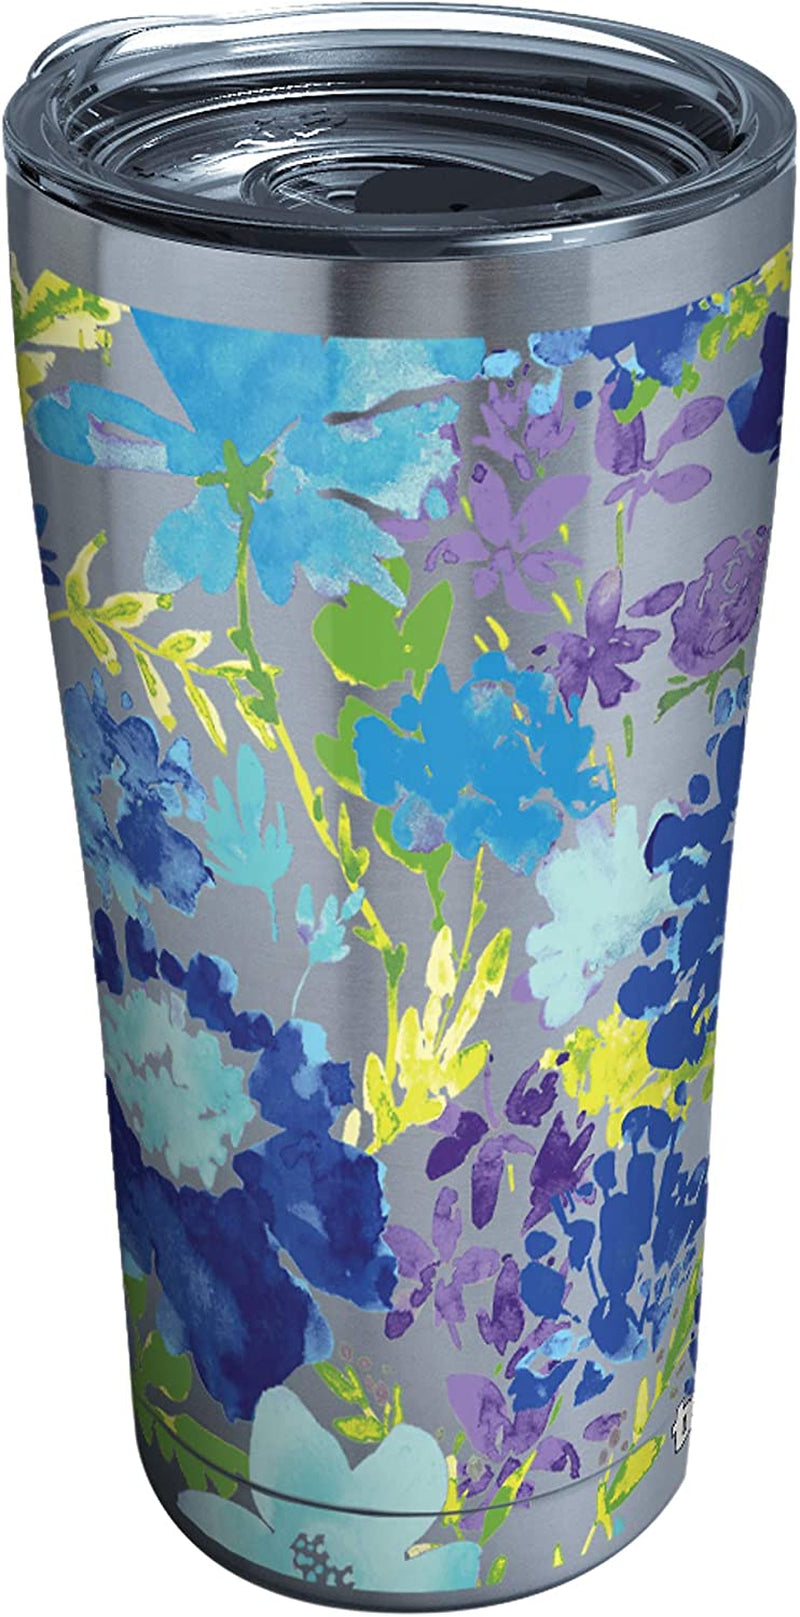 Tervis Made in USA Double Walled Fiesta Insulated Tumbler Cup Keeps Drinks Cold & Hot, 16Oz Mug - Purple Lid, Purple Floral Home & Garden > Kitchen & Dining > Tableware > Drinkware Tervis Stainless Steel 20oz 